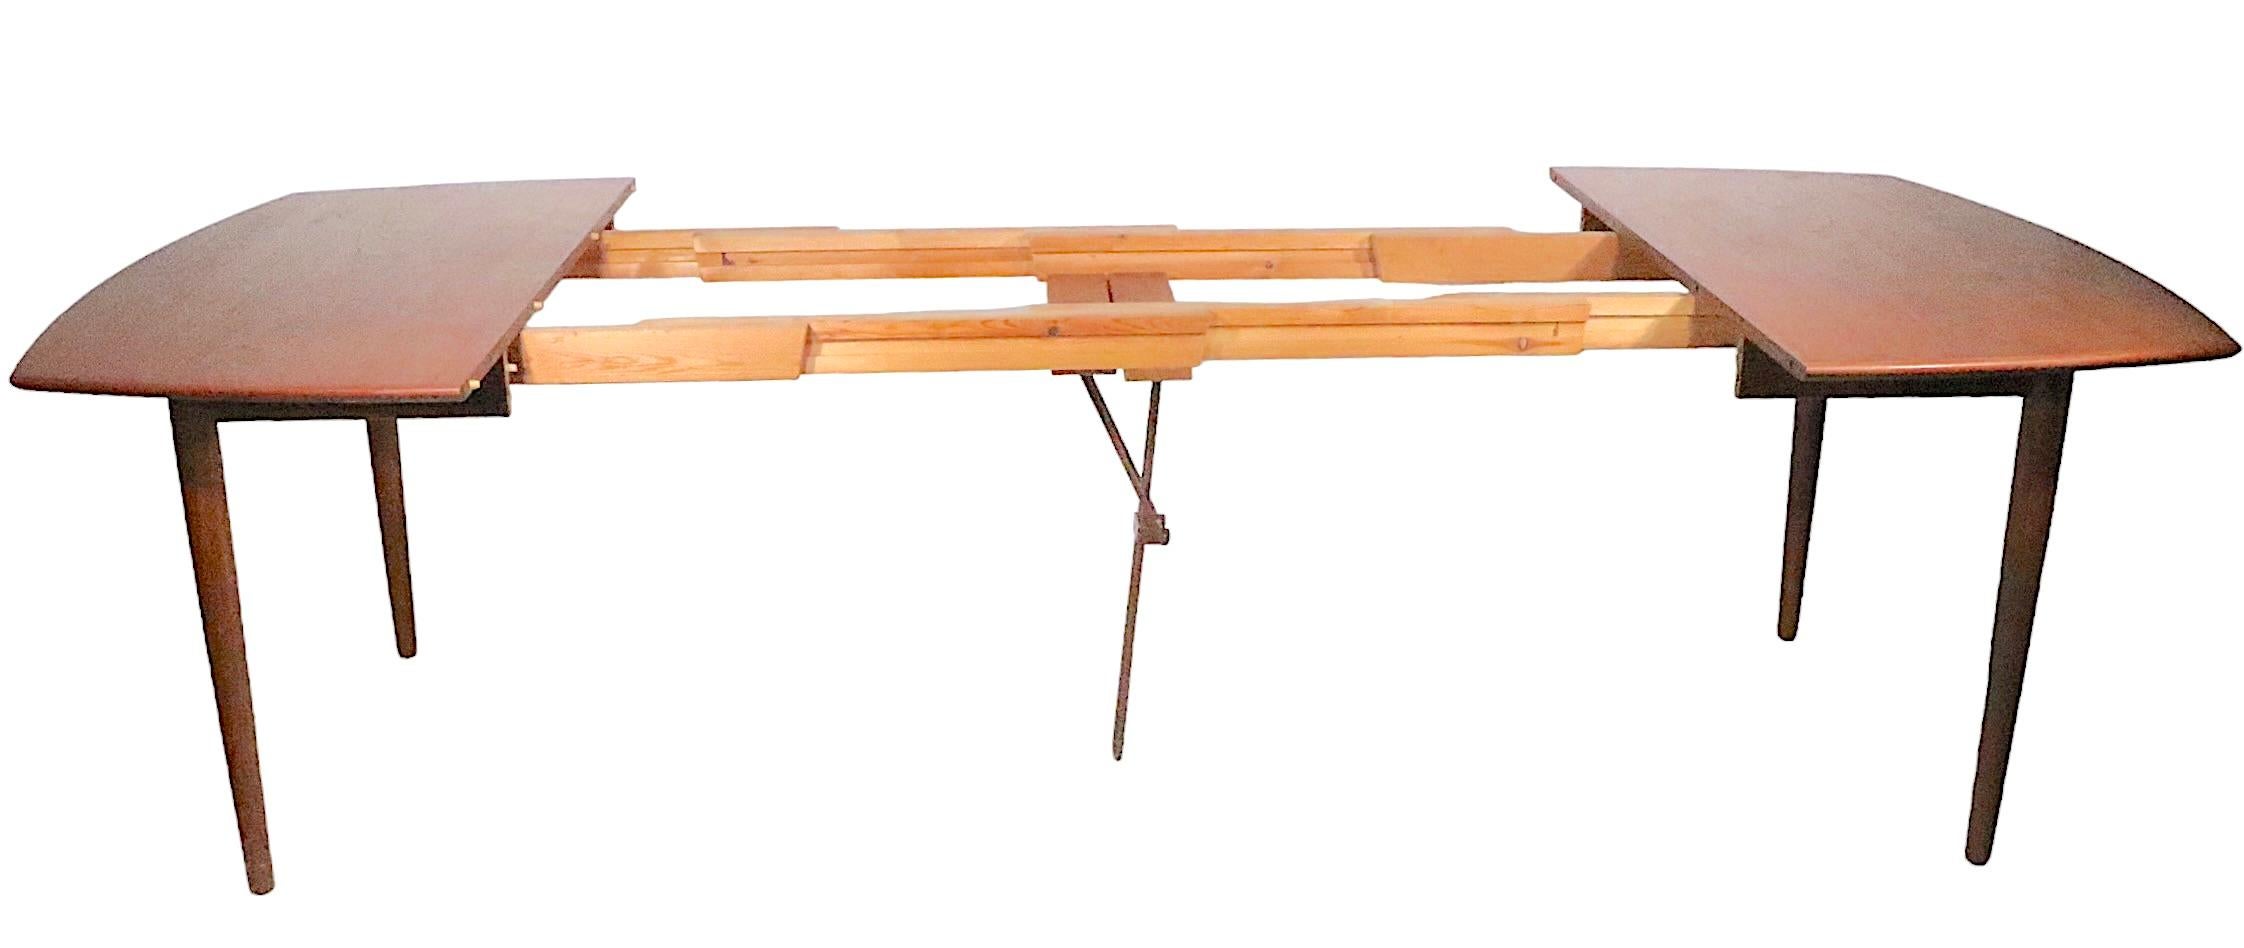 Danish Mid Century Modern Teak Extension  Dining Table by H W Klein  c 1950's For Sale 9